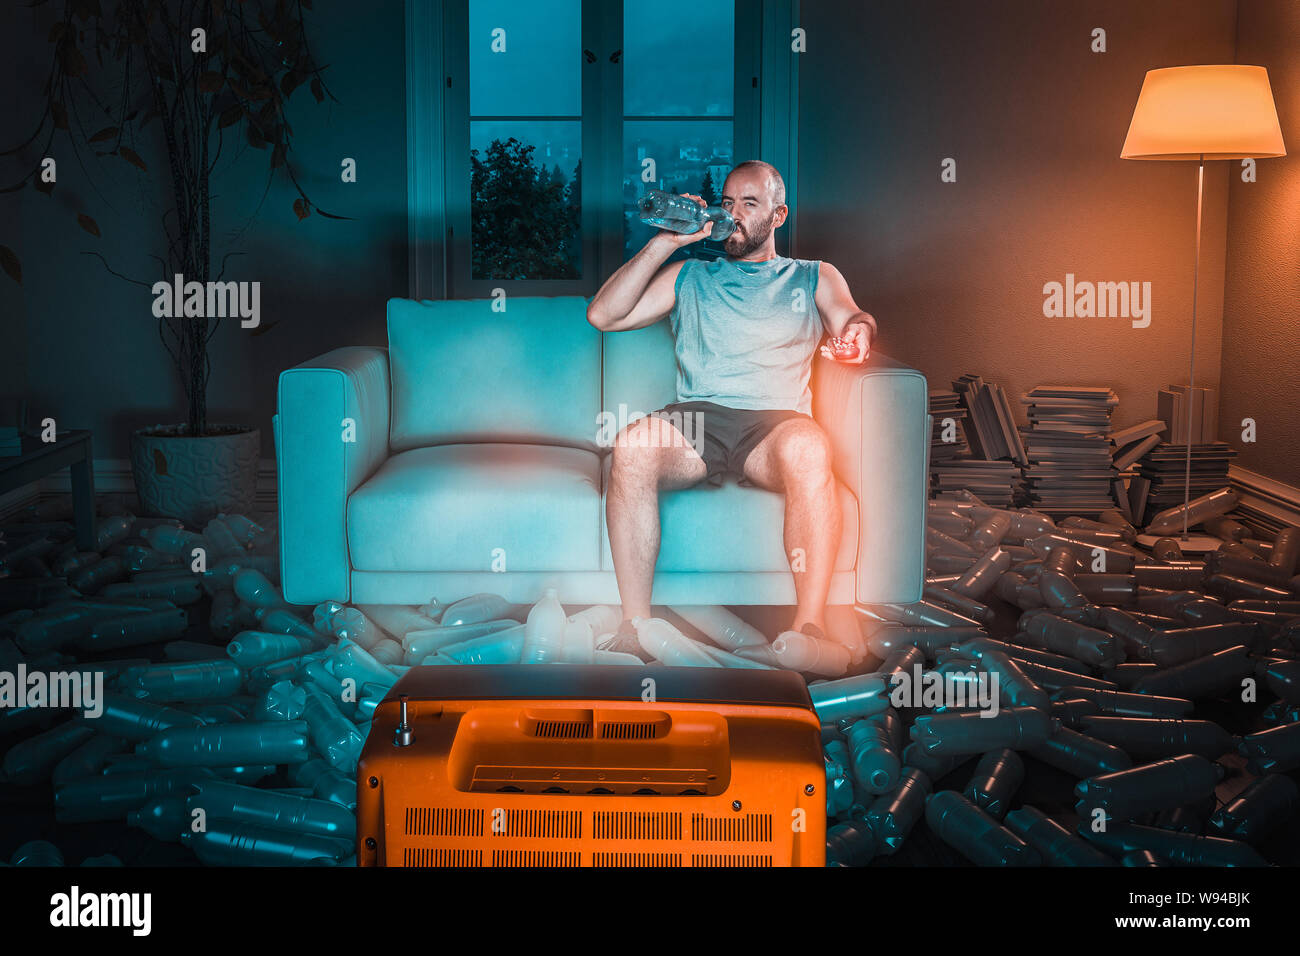 man watches tv on the sofa and drinks from a plastic water bottle, floor full of used bottles. Concept of exaggerated use of plastic and recycling. Stock Photo